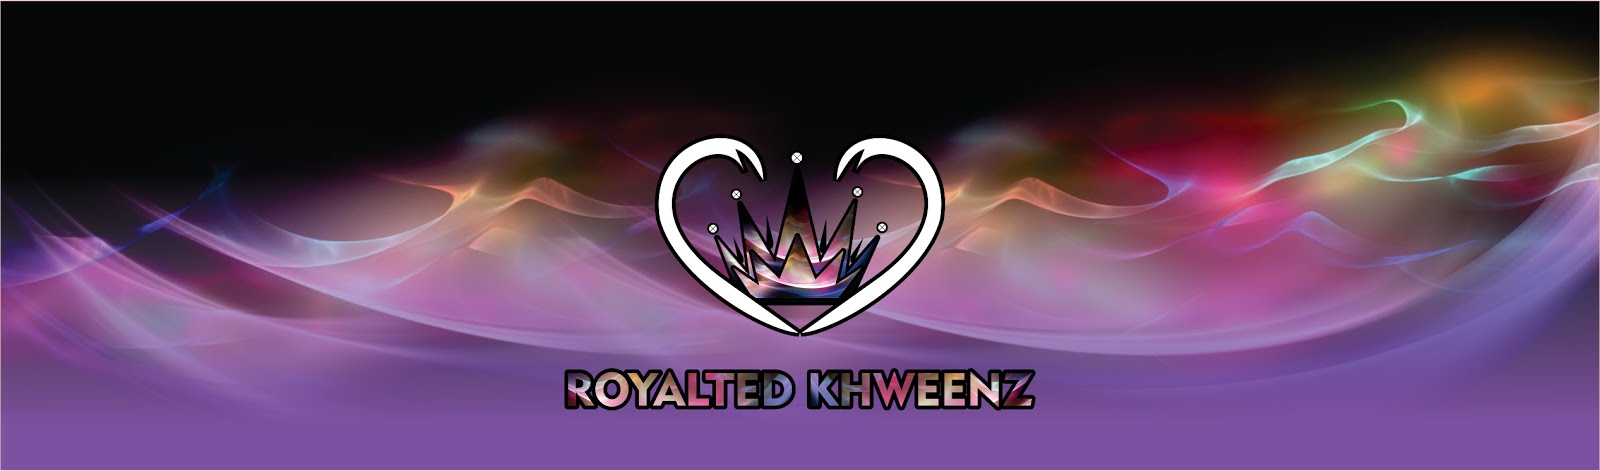 Welcome To Royalted Khween's Home